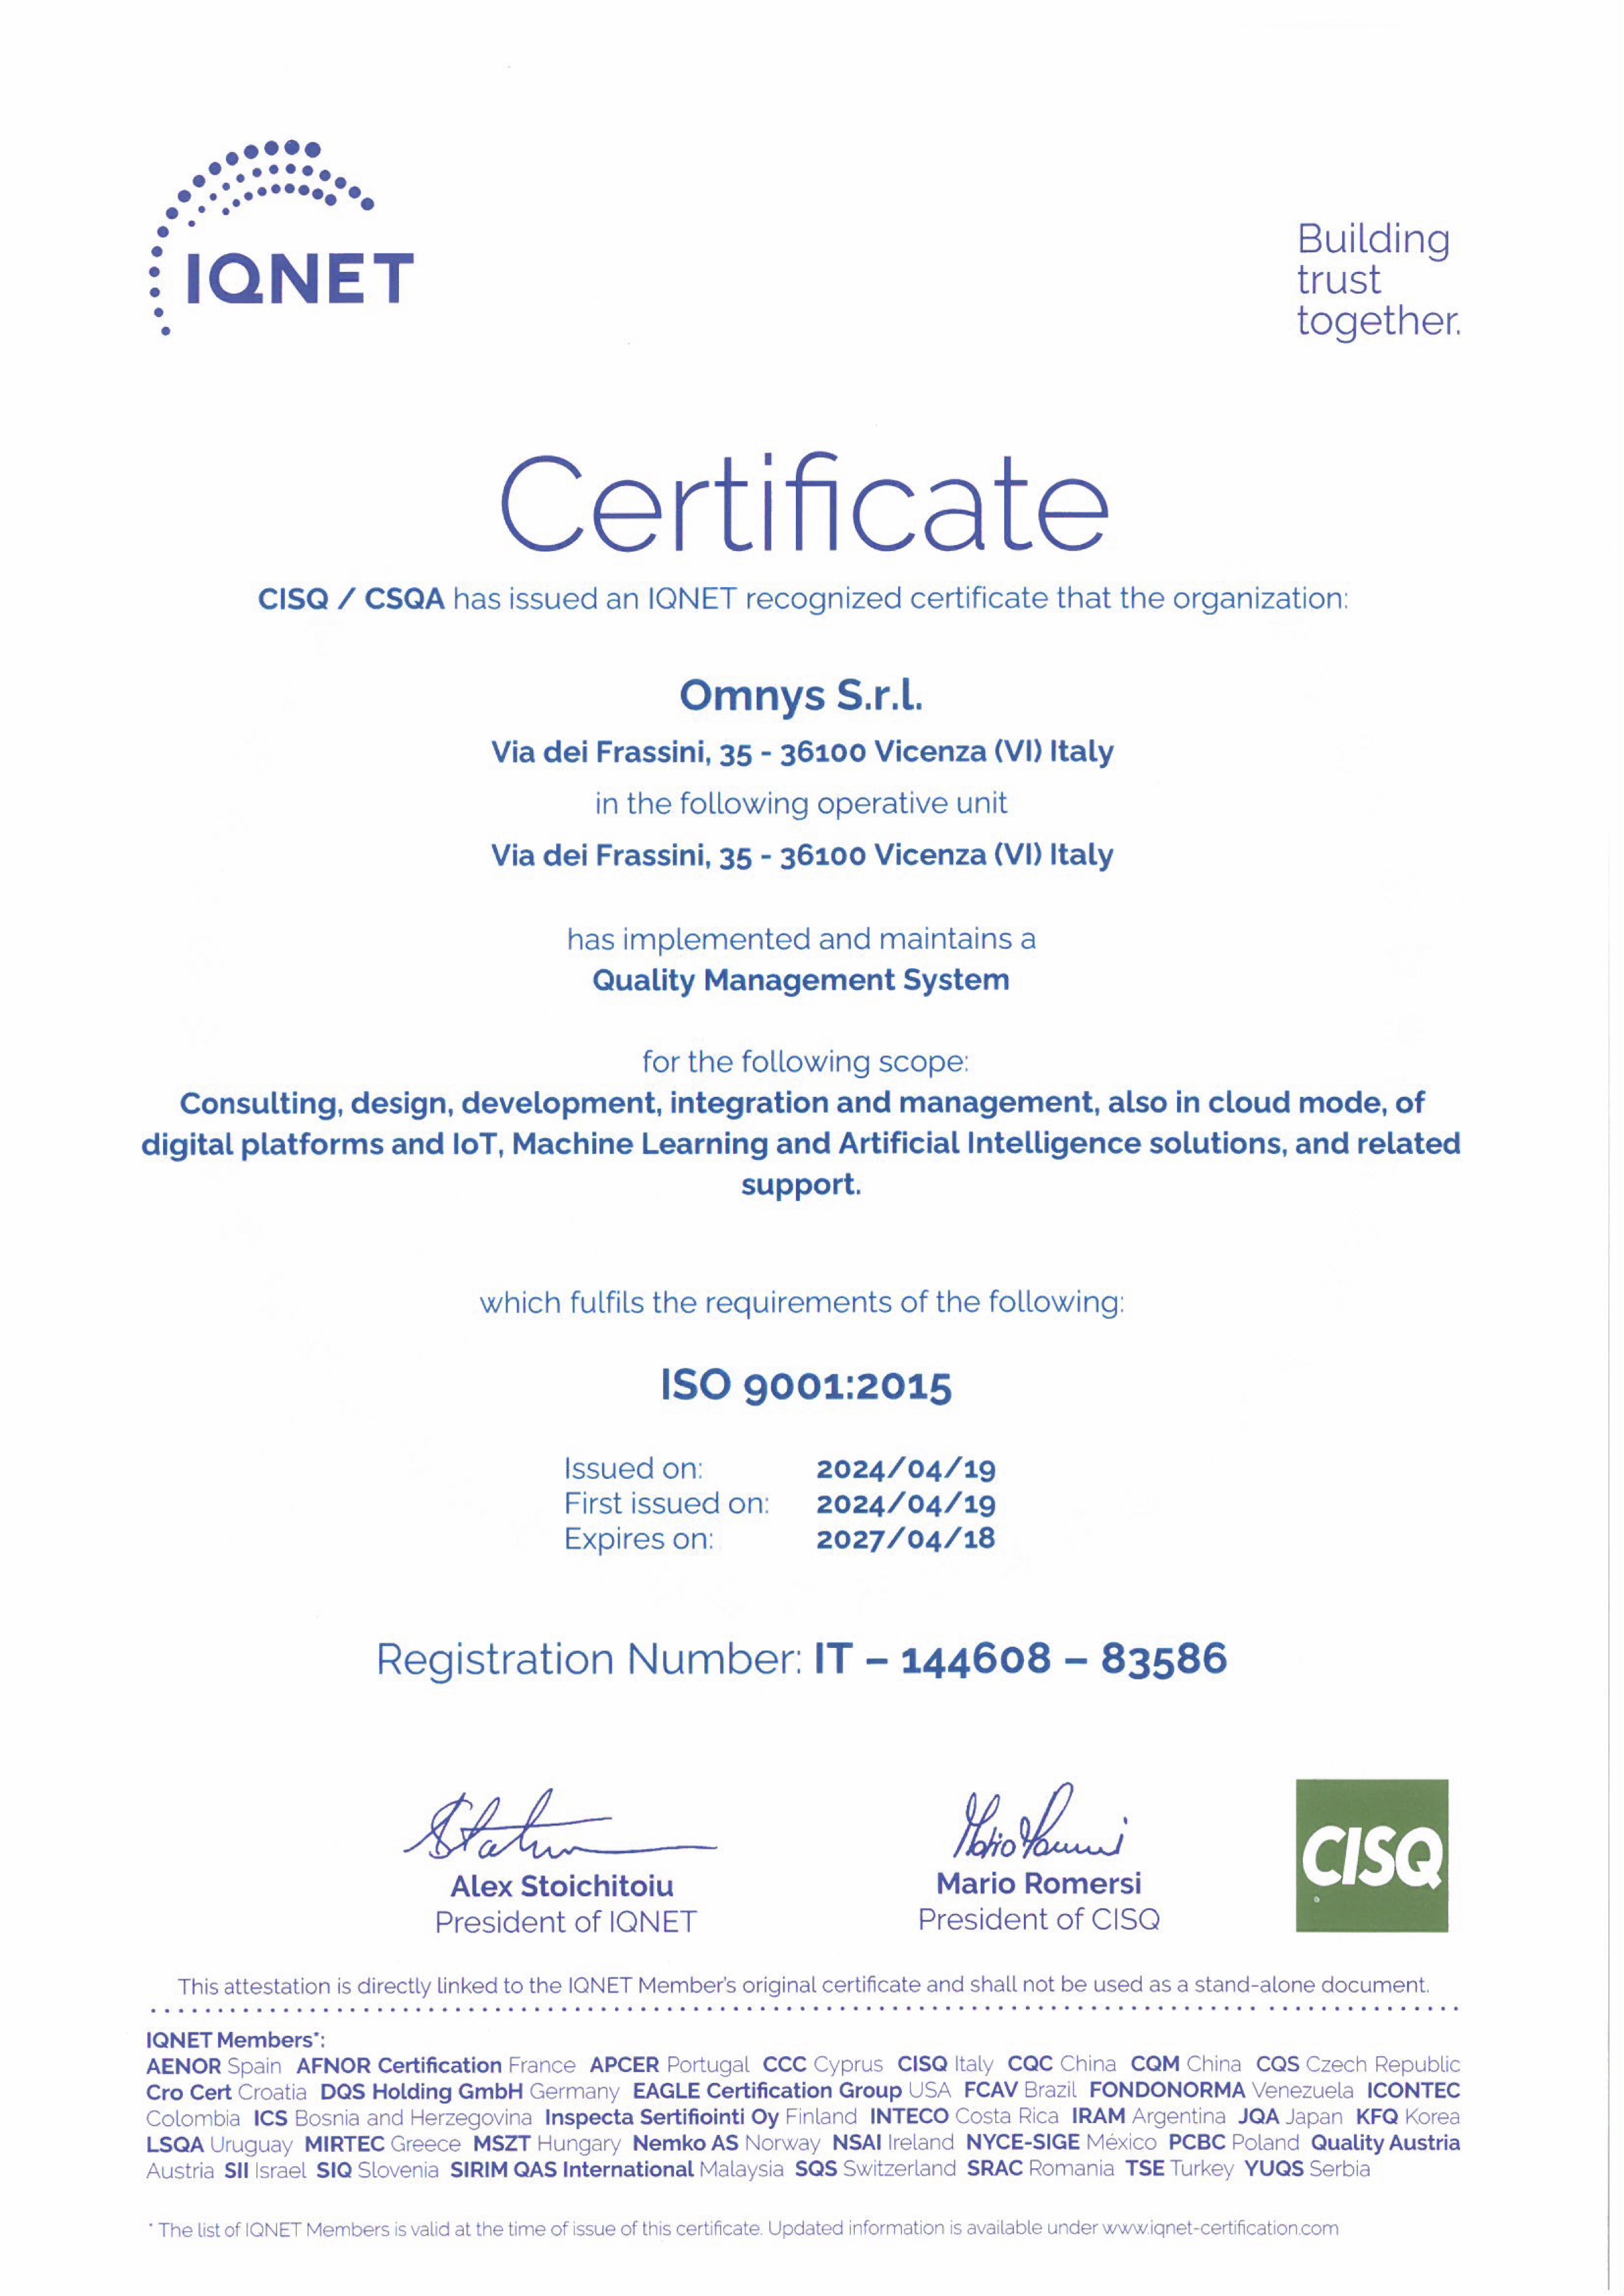 ISO 9001 Omnys Certificate